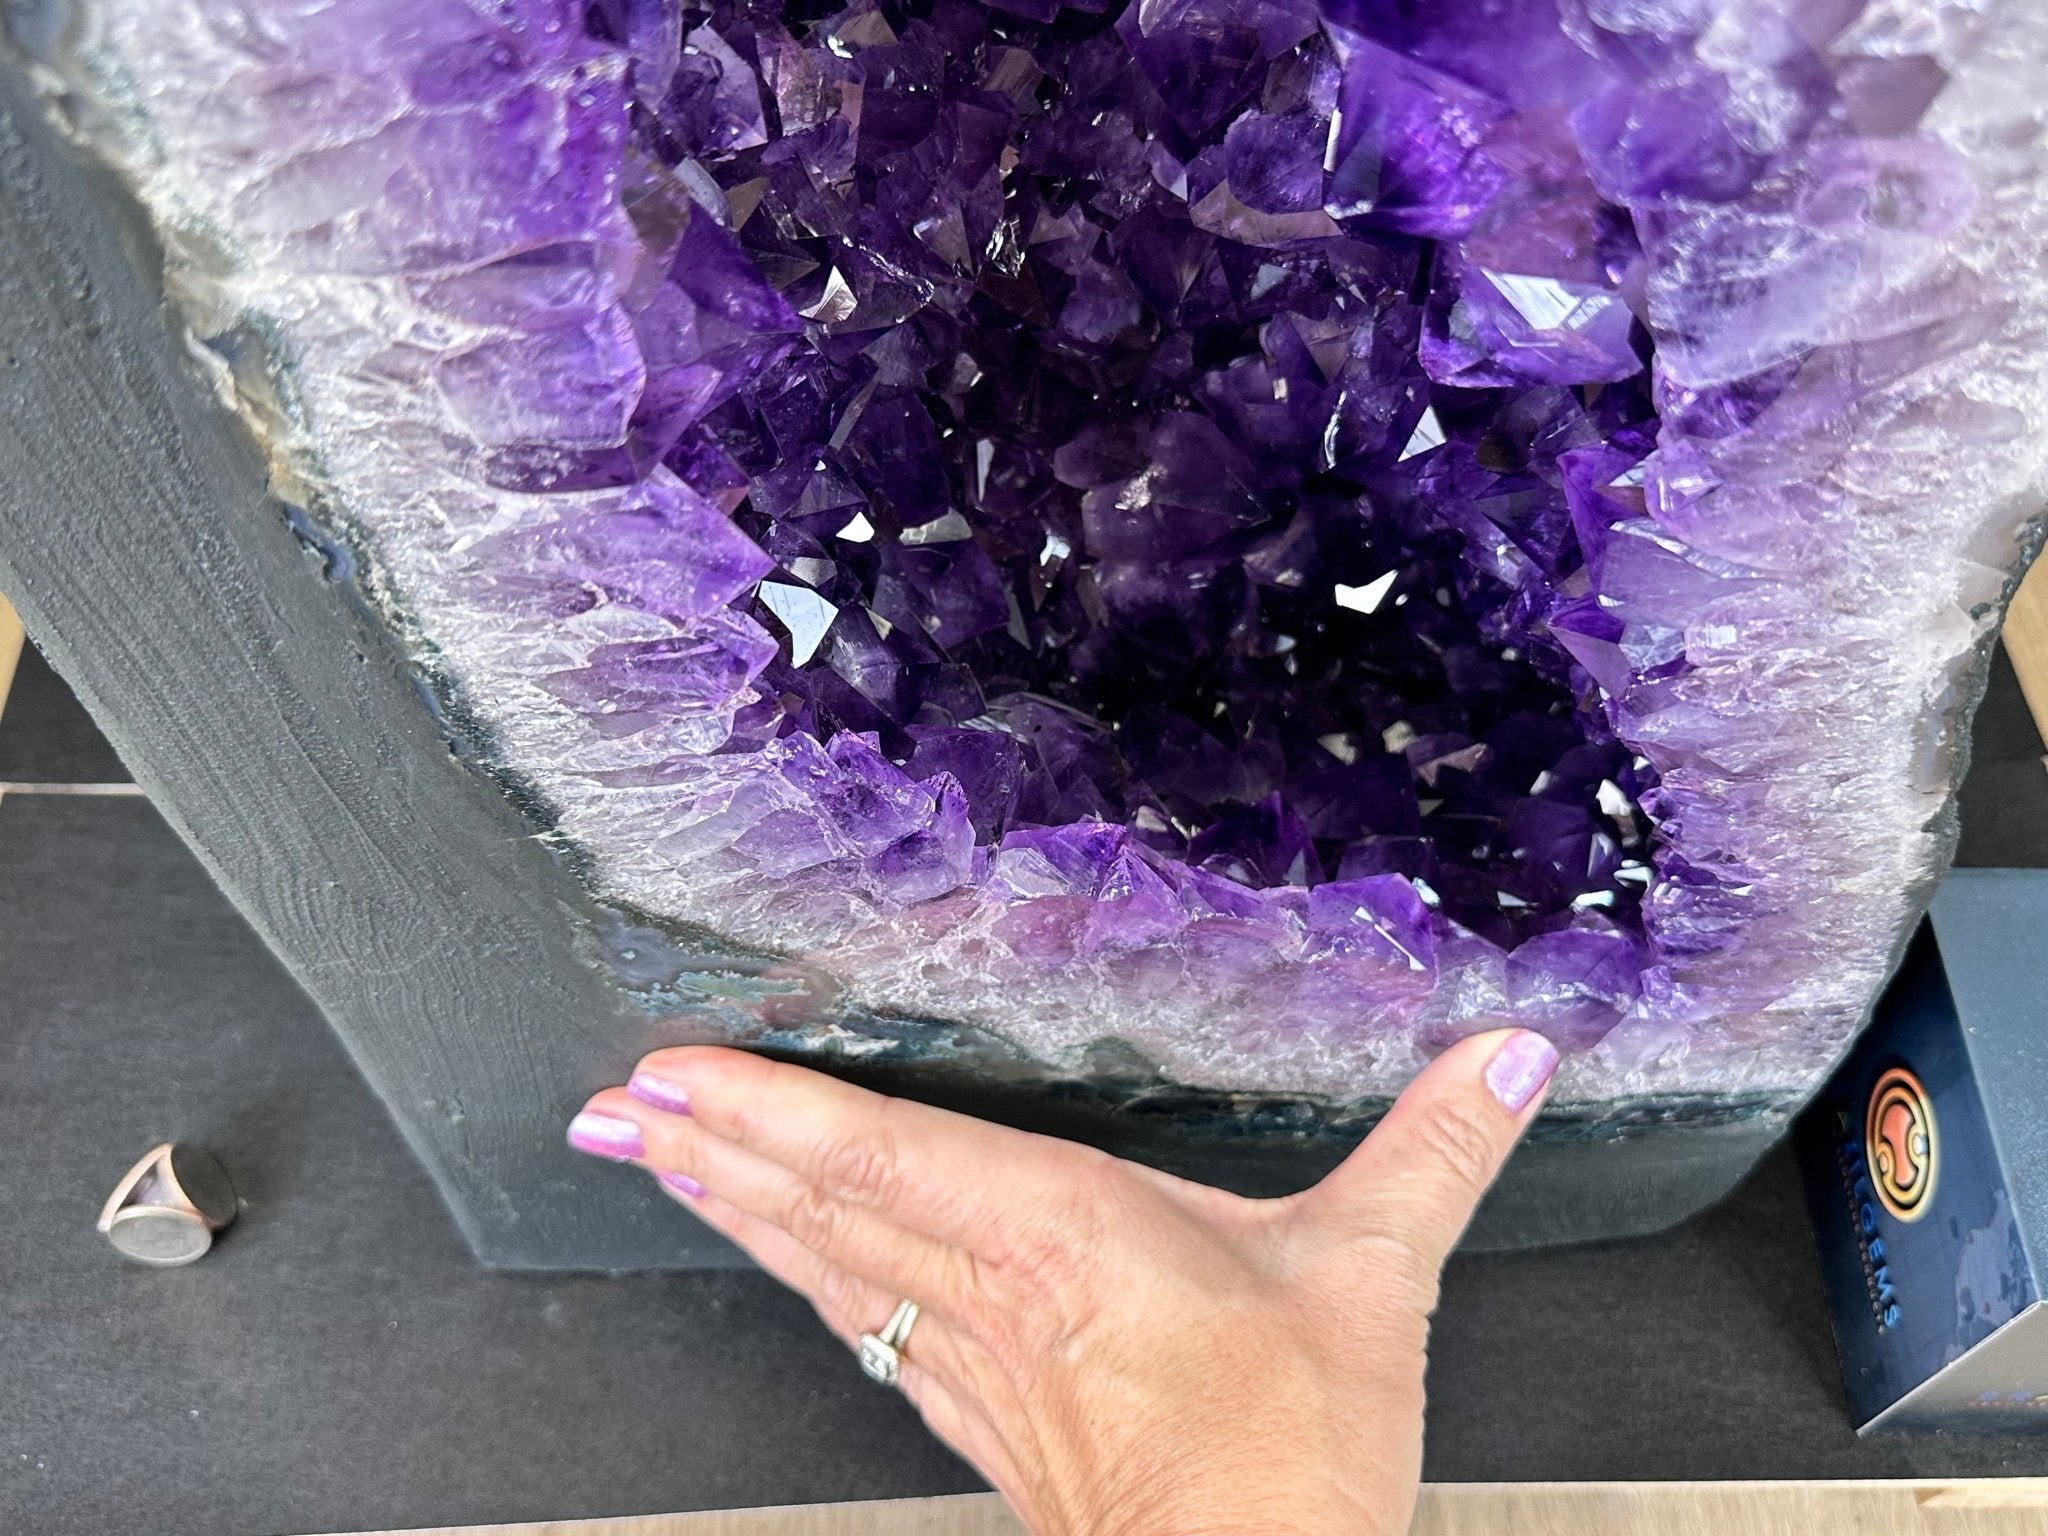 Super Quality Brazilian Amethyst Cathedral, 388 lbs & 72" Tall #5601-1341 - Brazil GemsBrazil GemsSuper Quality Brazilian Amethyst Cathedral, 388 lbs & 72" Tall #5601-1341Cathedrals5601-1341